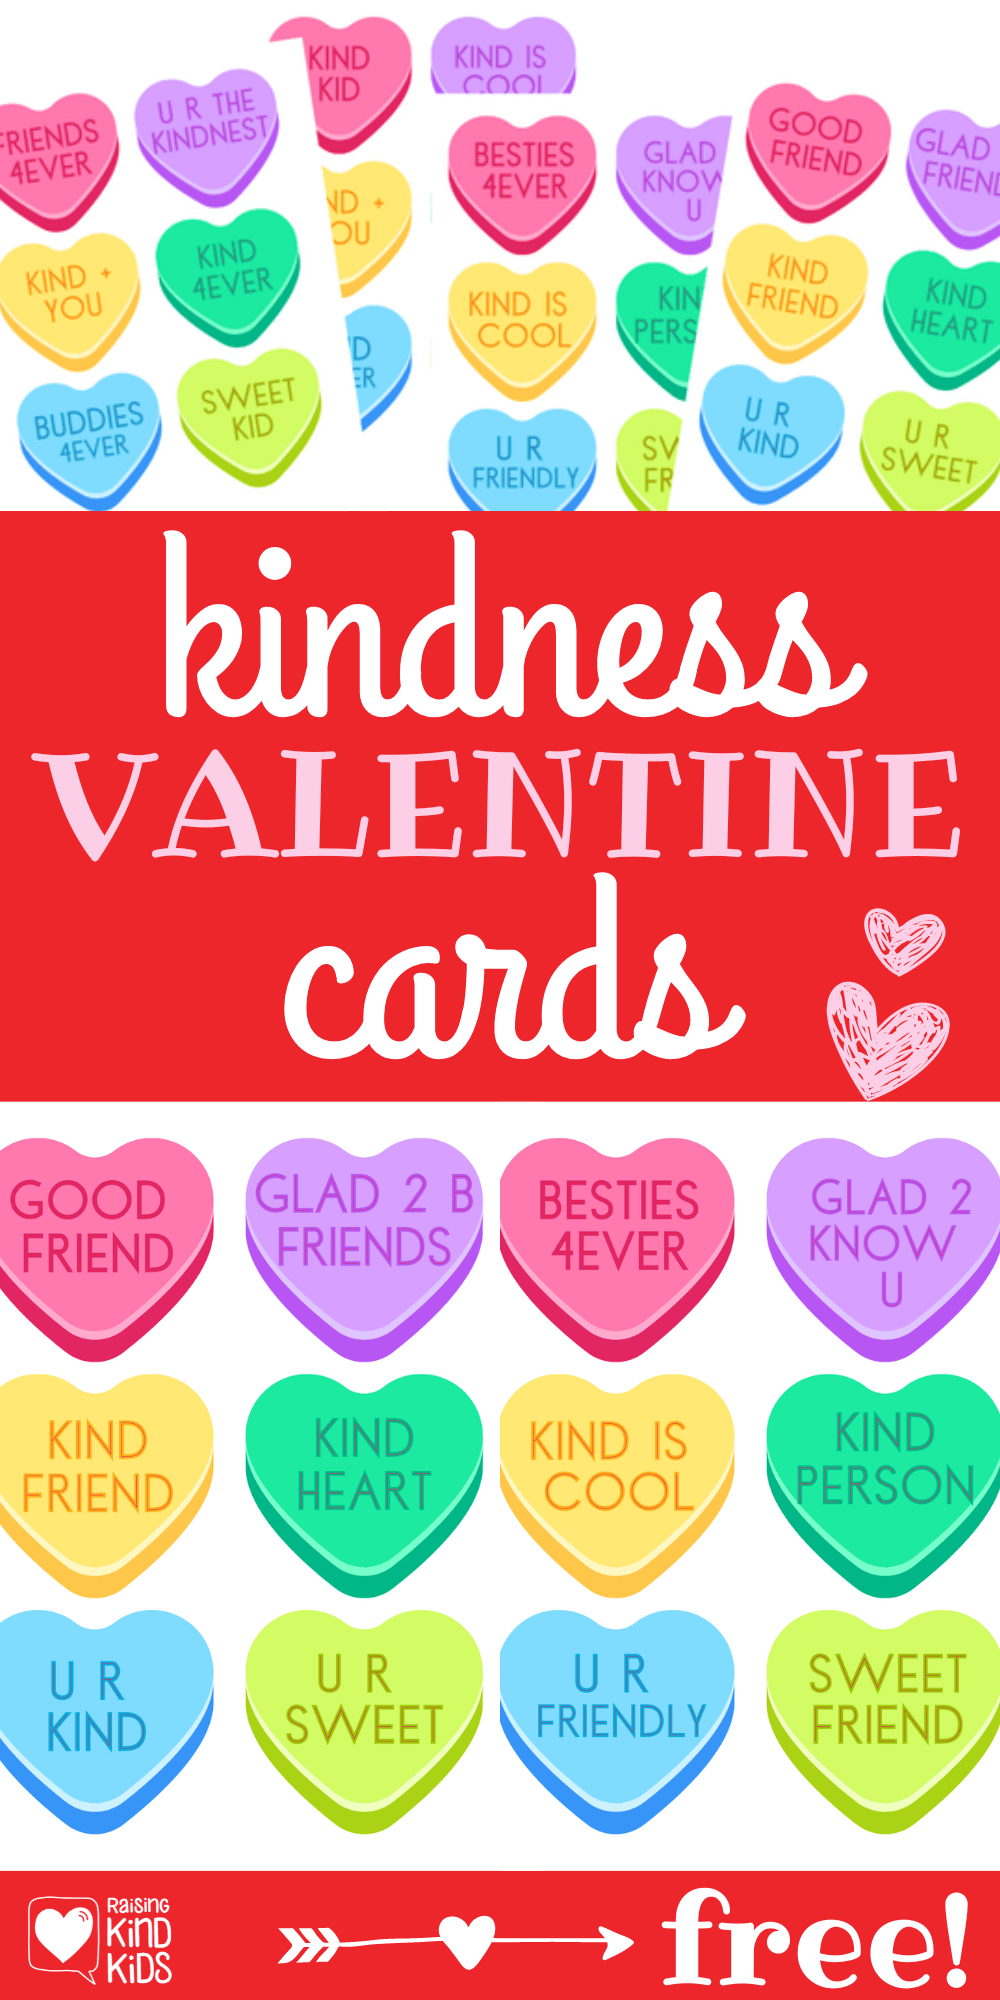 Use these printable valentine cards to spread kindness this Valentine's Day on conversation hearts.